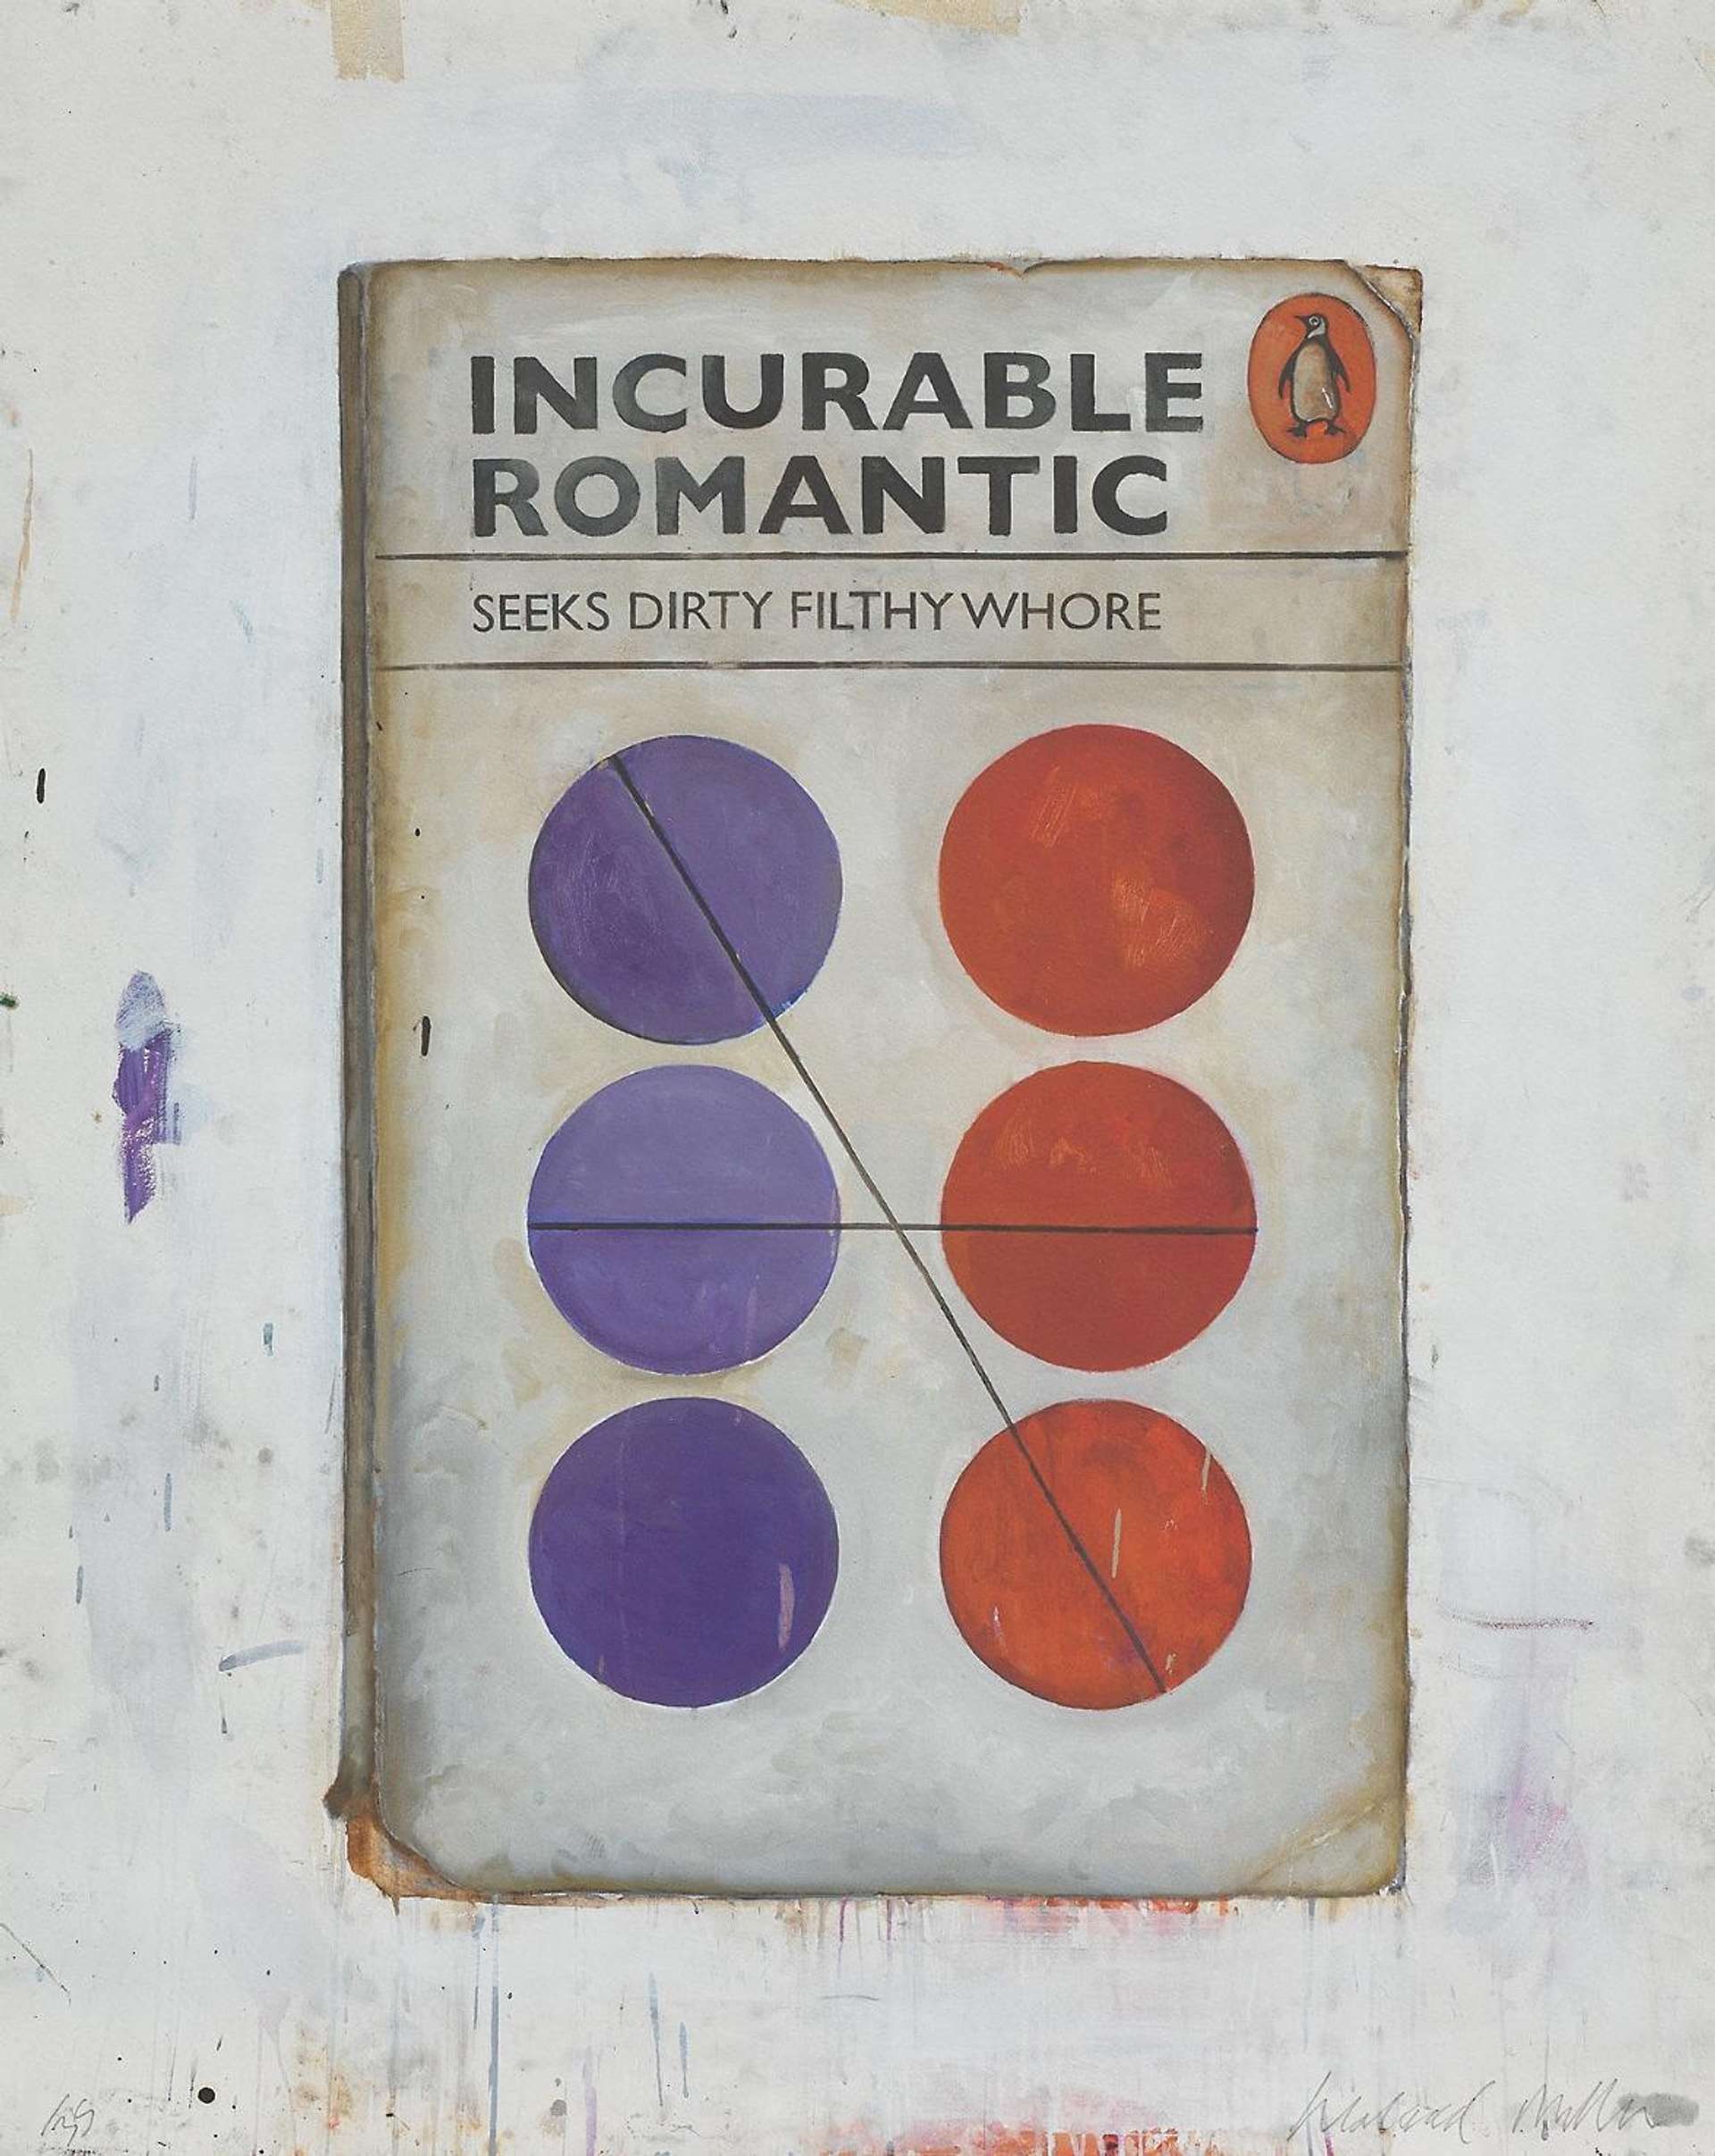 Harland Miller: Incurable Romantic Seeks Dirty Filthy Whore - Signed Print